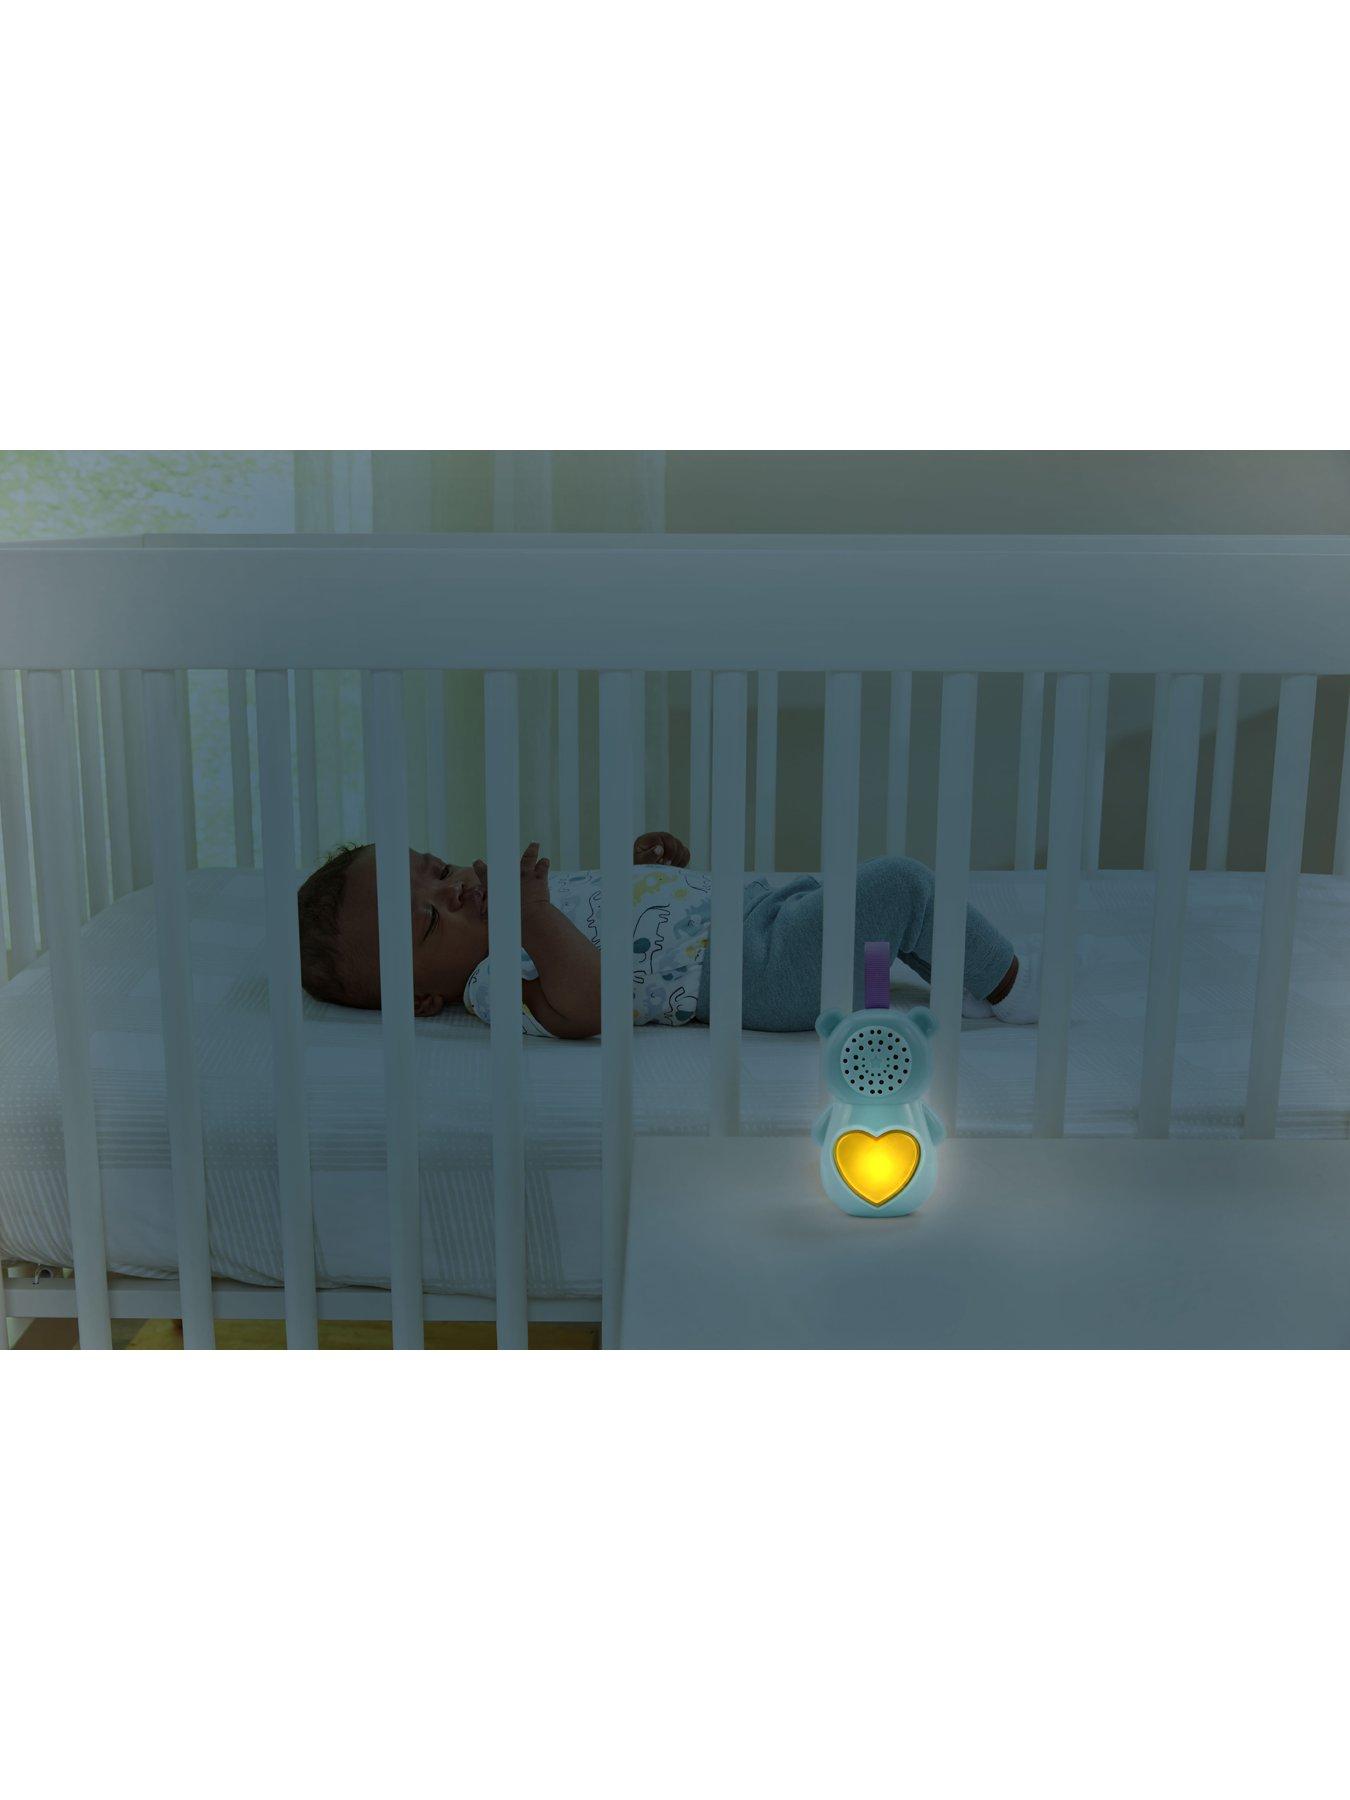 VTECH Baby Lullaby Bear Crib Projector Infant Soothing Sounds Light Birth+  NEW